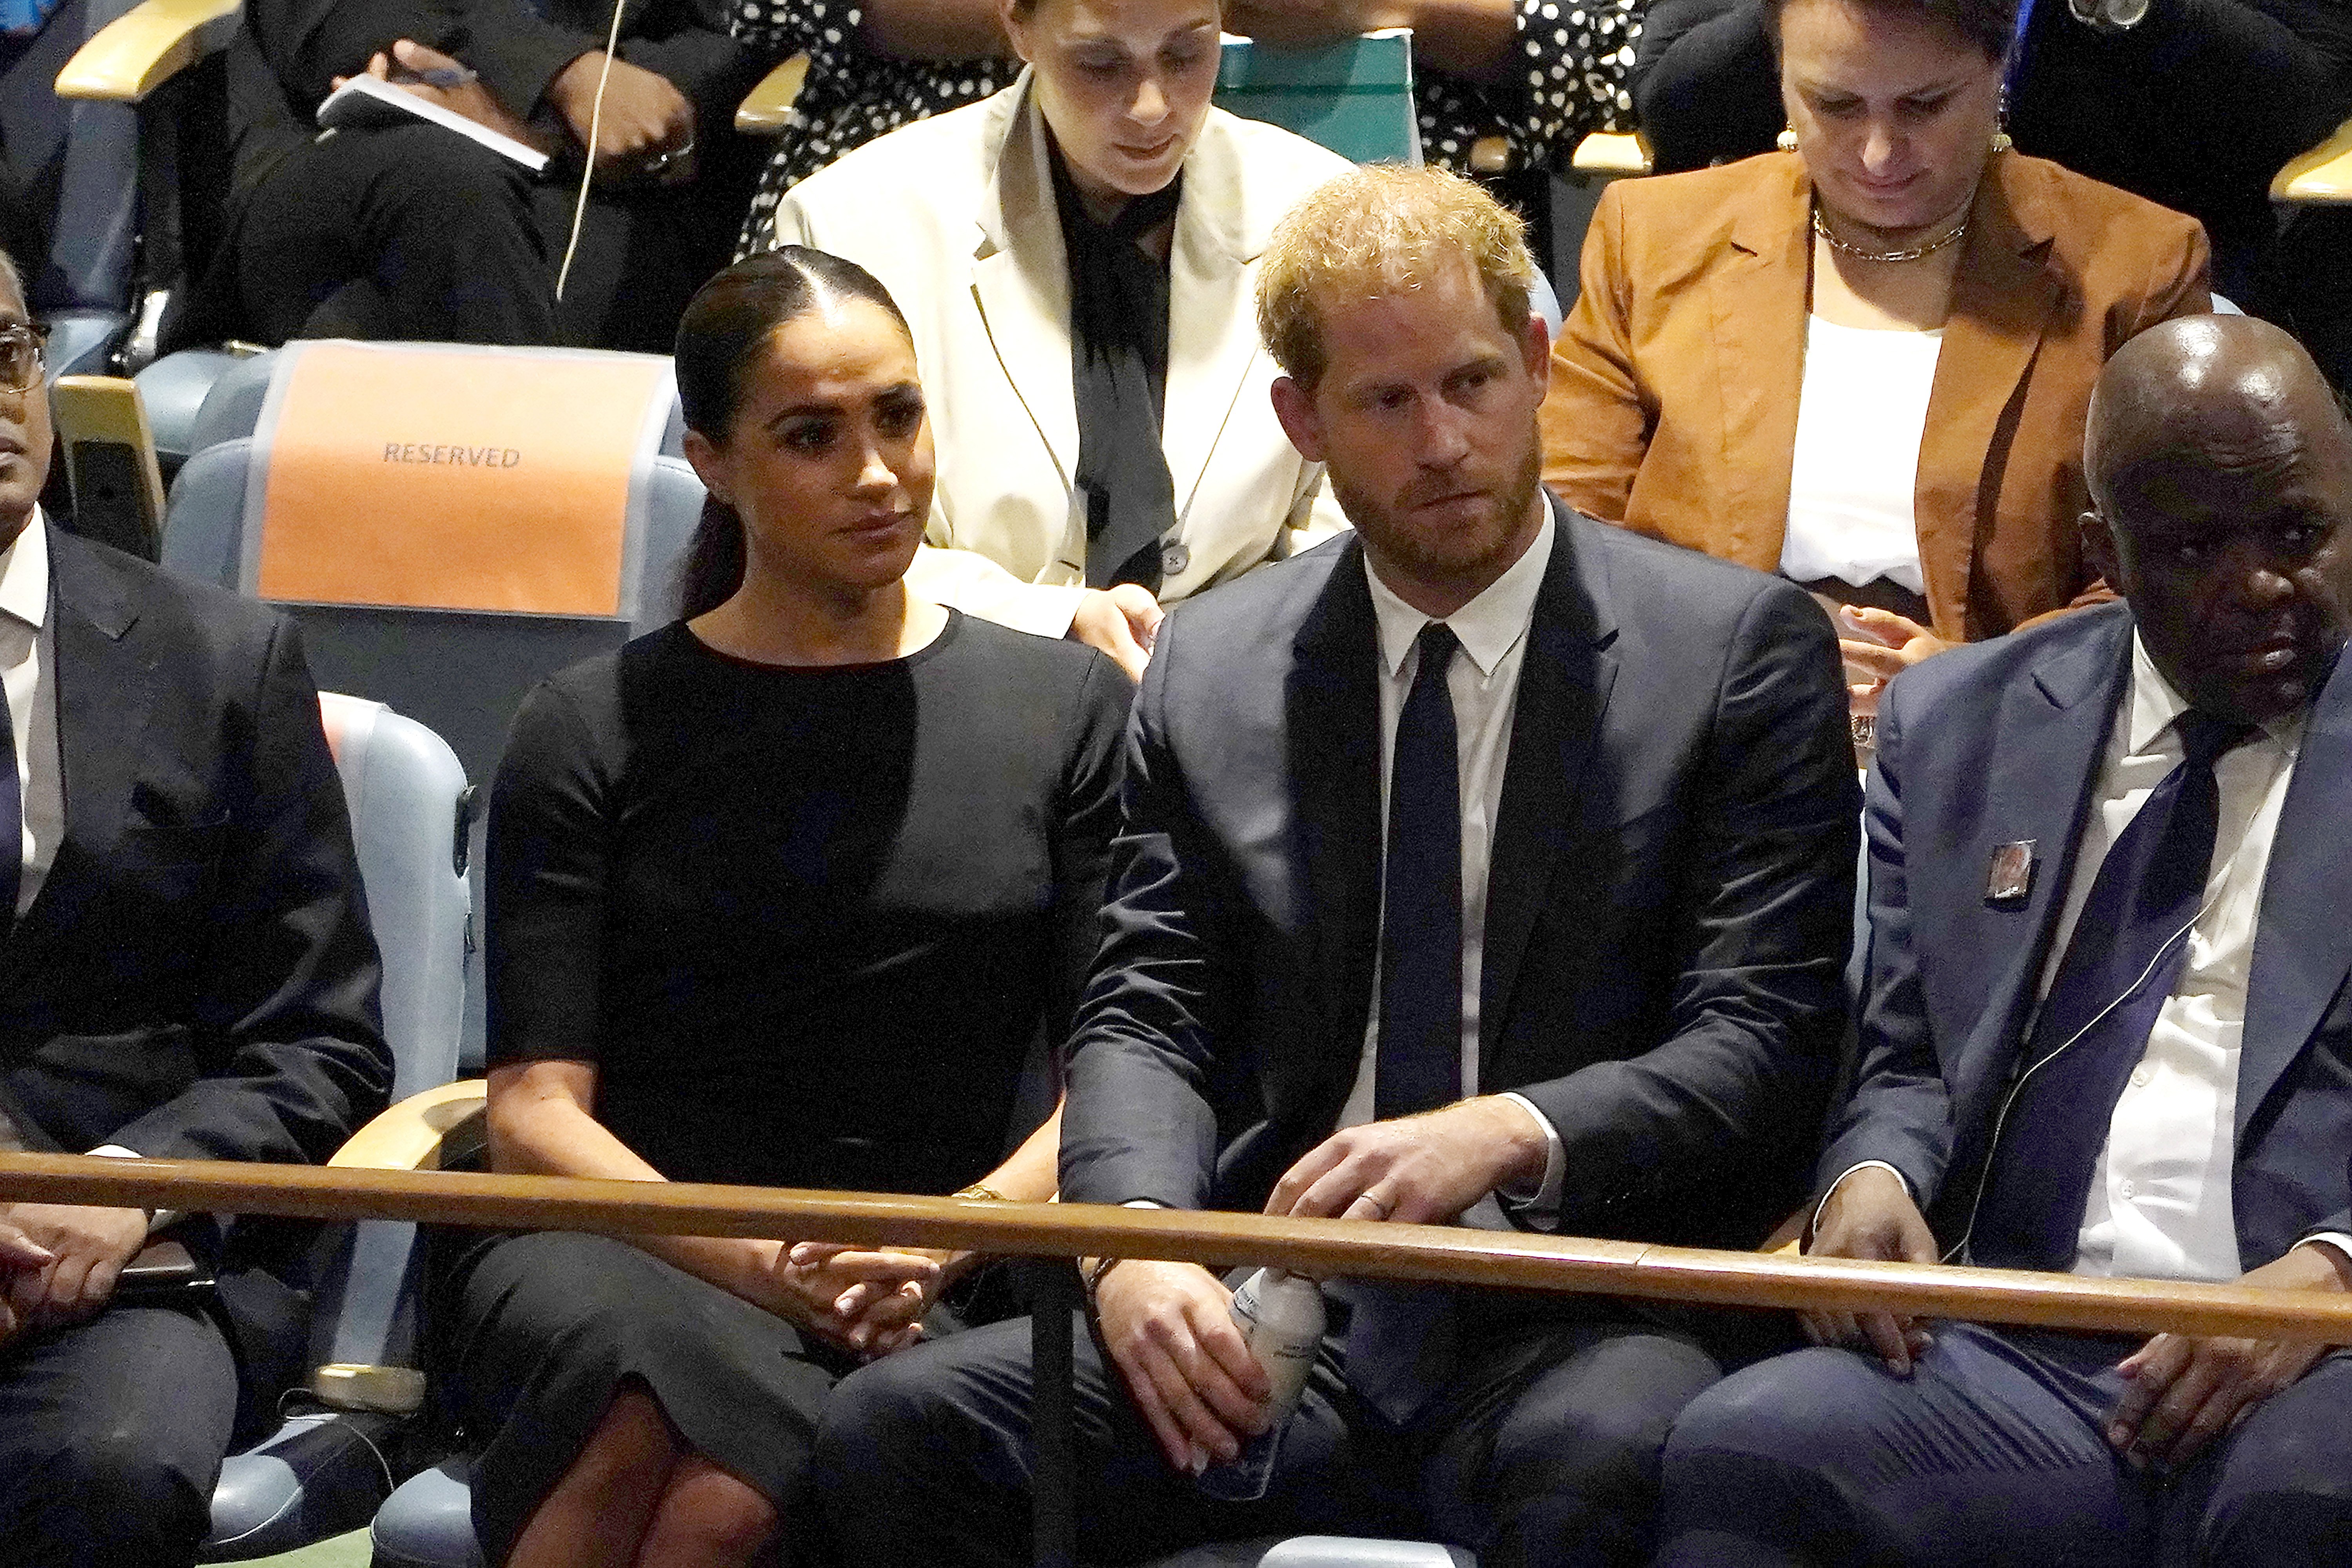 Prince Harry and Meghan Markle pictured at the General Assembly during the Nelson Mandela International Day at the United Nations Headquarters on July 18, 2022 in New York City.┃Source: Getty Images